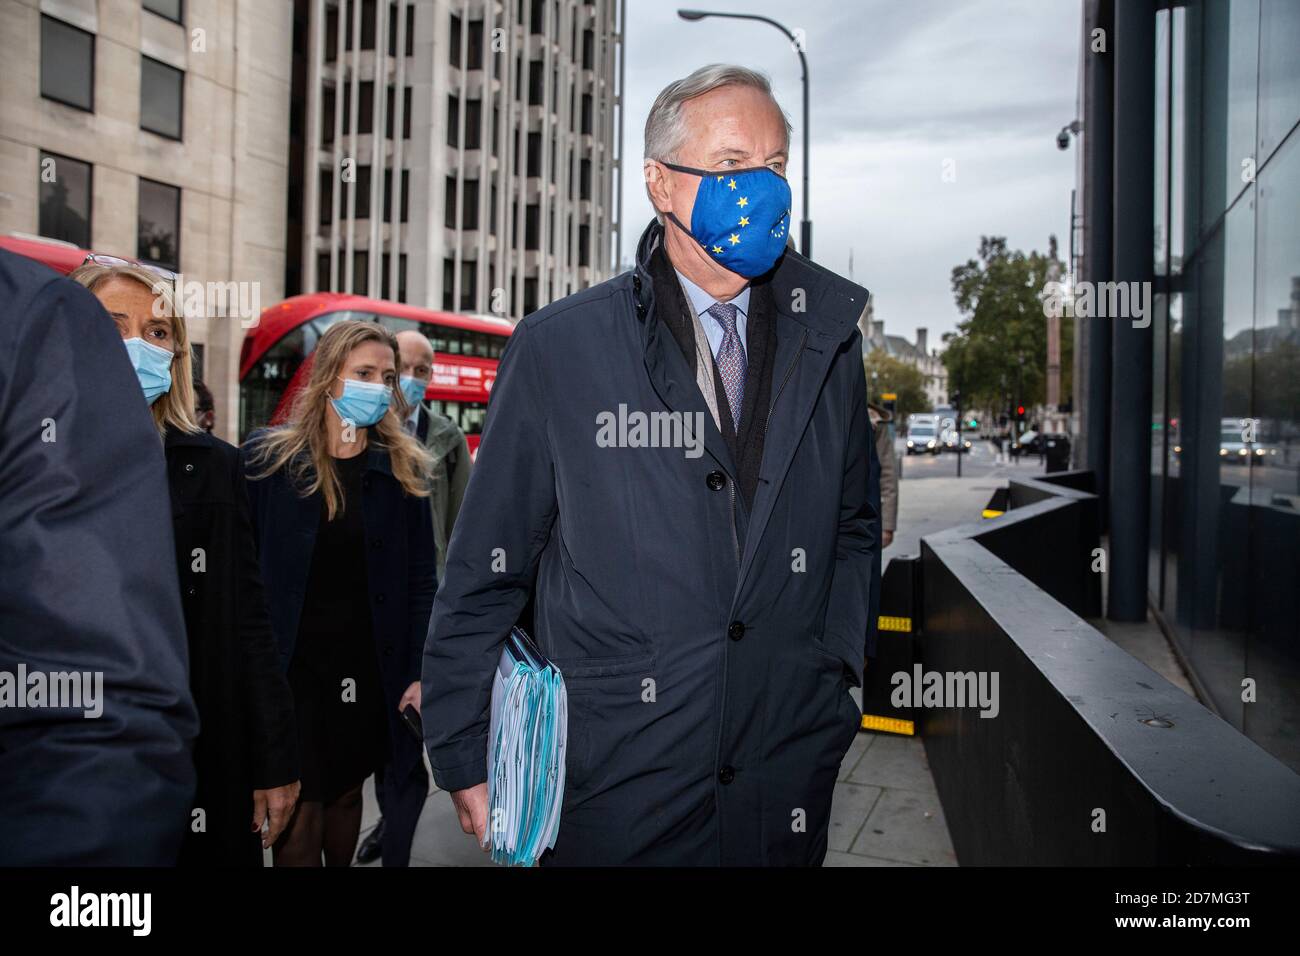 London, UK. 24th Oct, 2020. Michel Barnier arrives in Westminster for Brexit talks, London, UK 24th October 2020 Brexit Trade talks continue in London as the EU's Michel Barnier arrives at the IVS Conference Centre, No.1 Victoria Street today. Credit: Clickpics/Alamy Live News Stock Photo